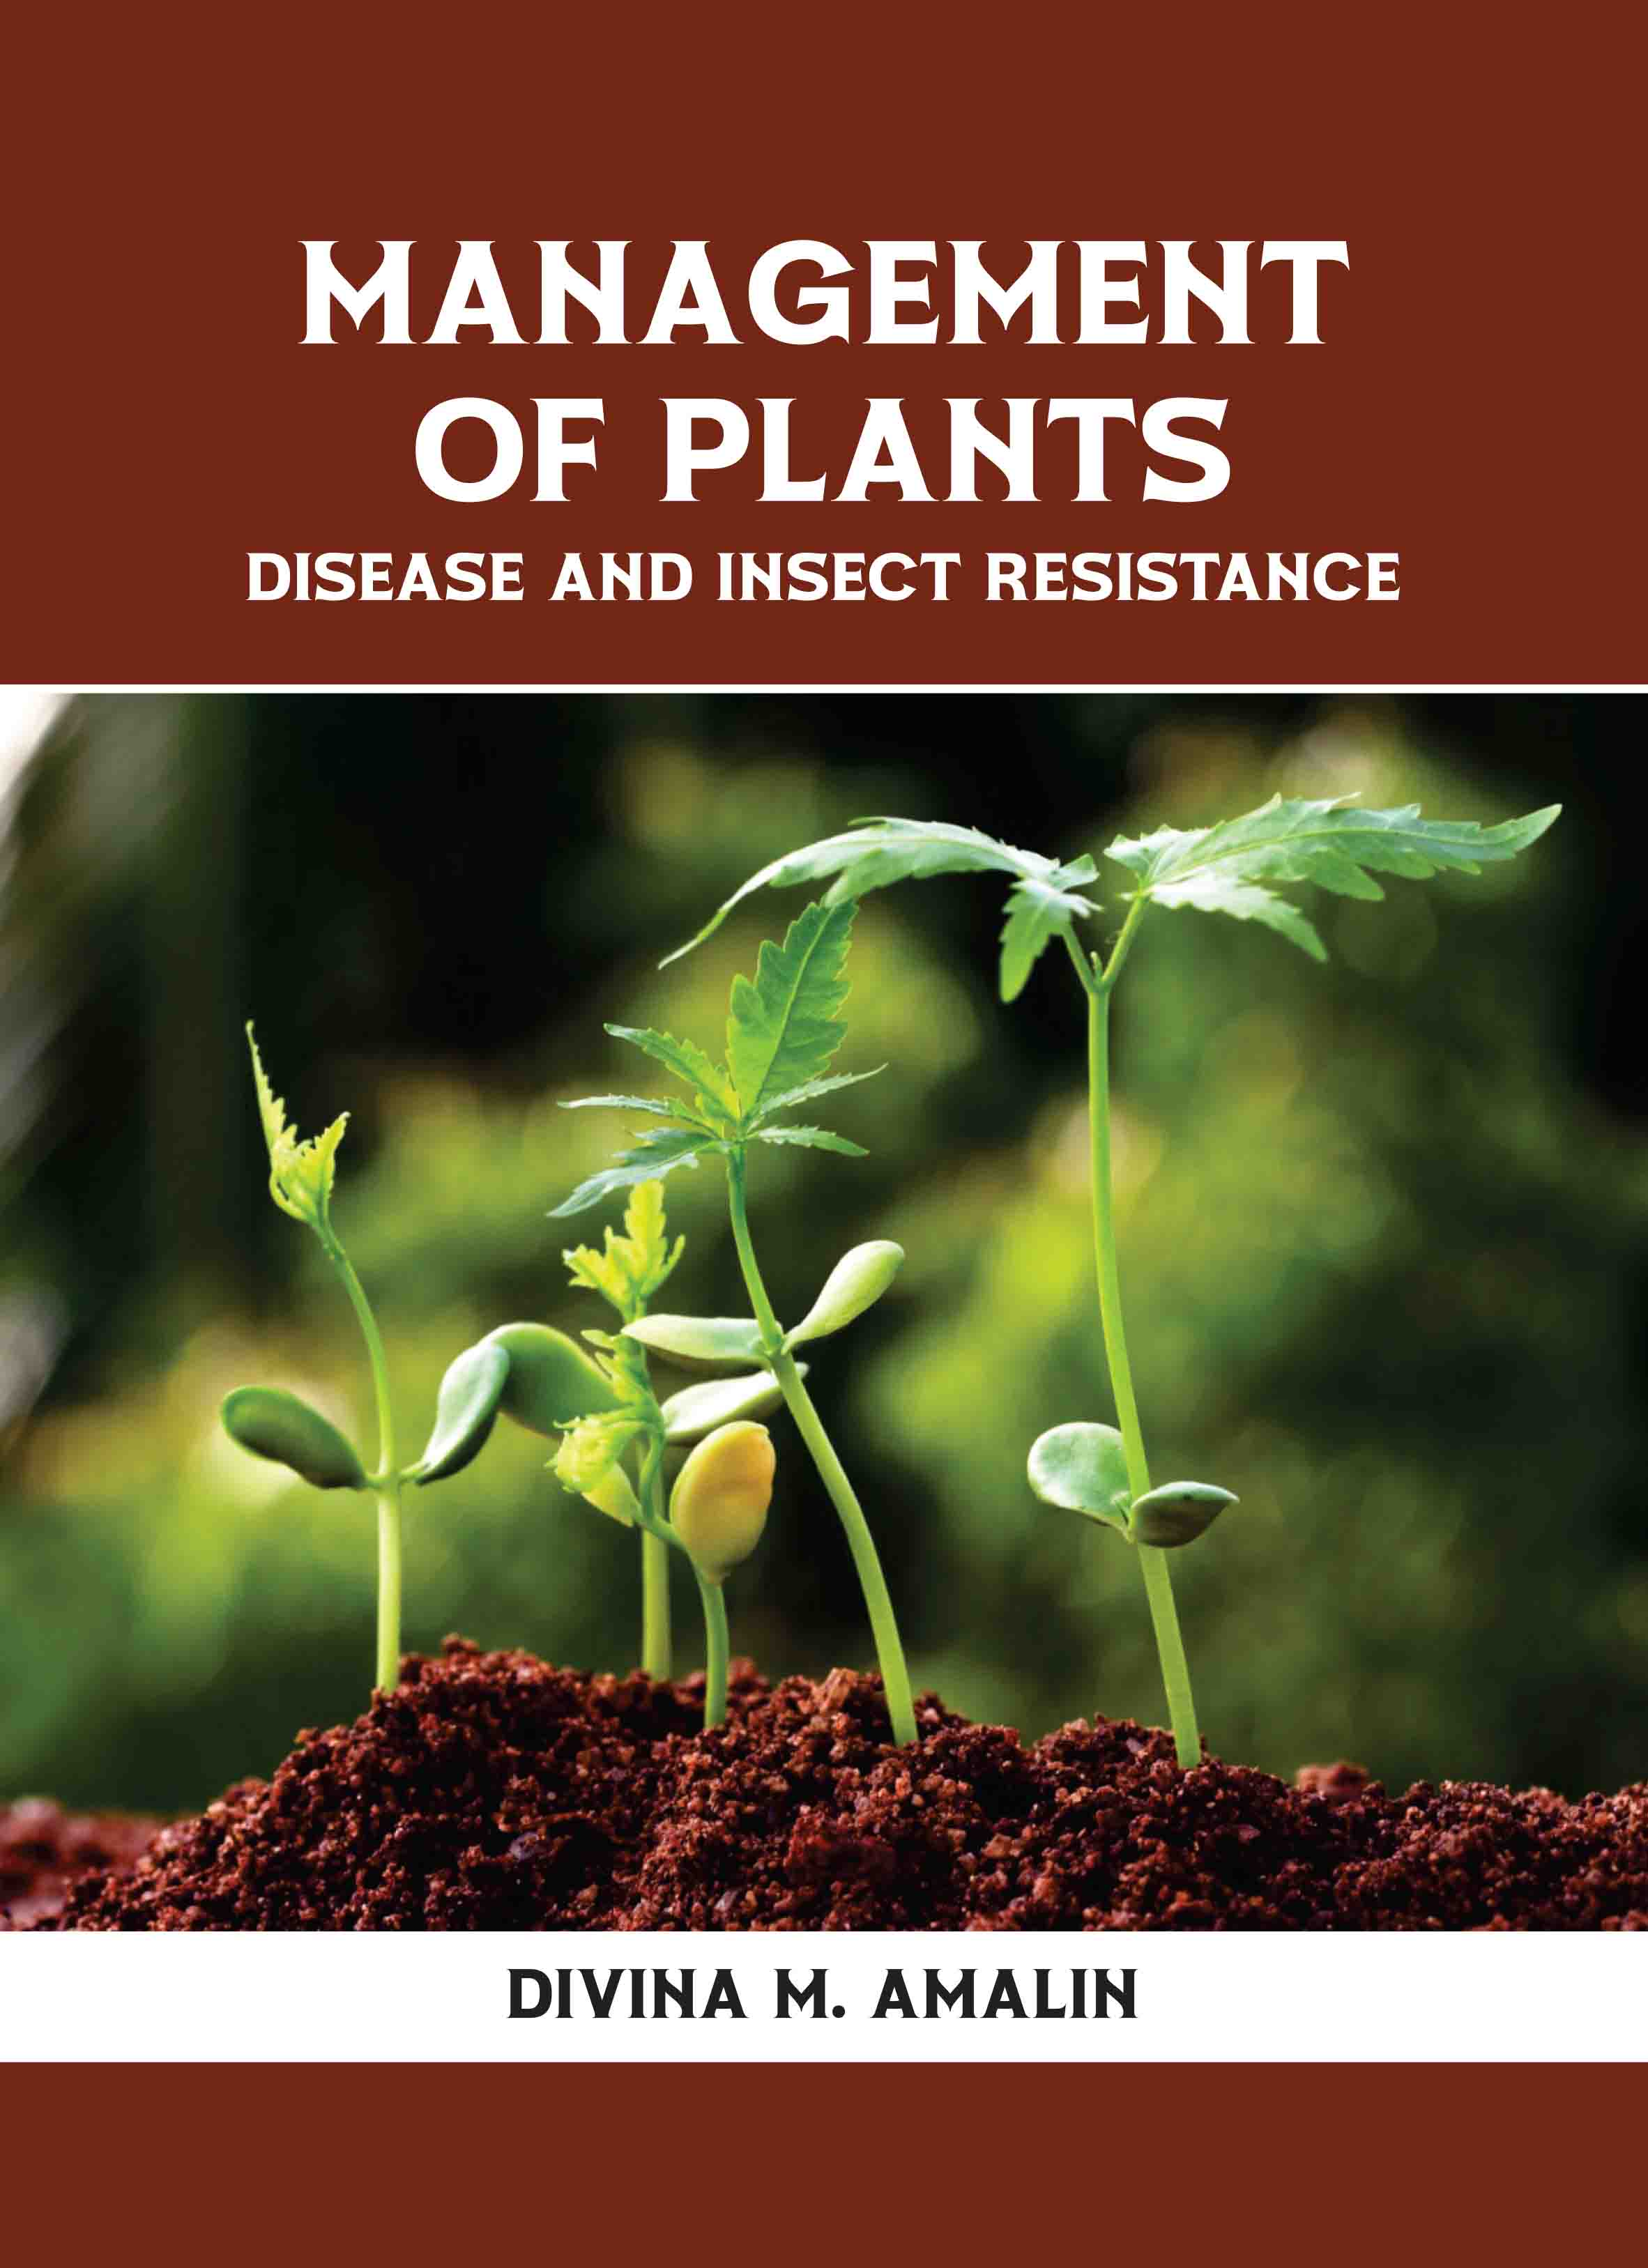 Management of Plants: Disease and Insect Resistance